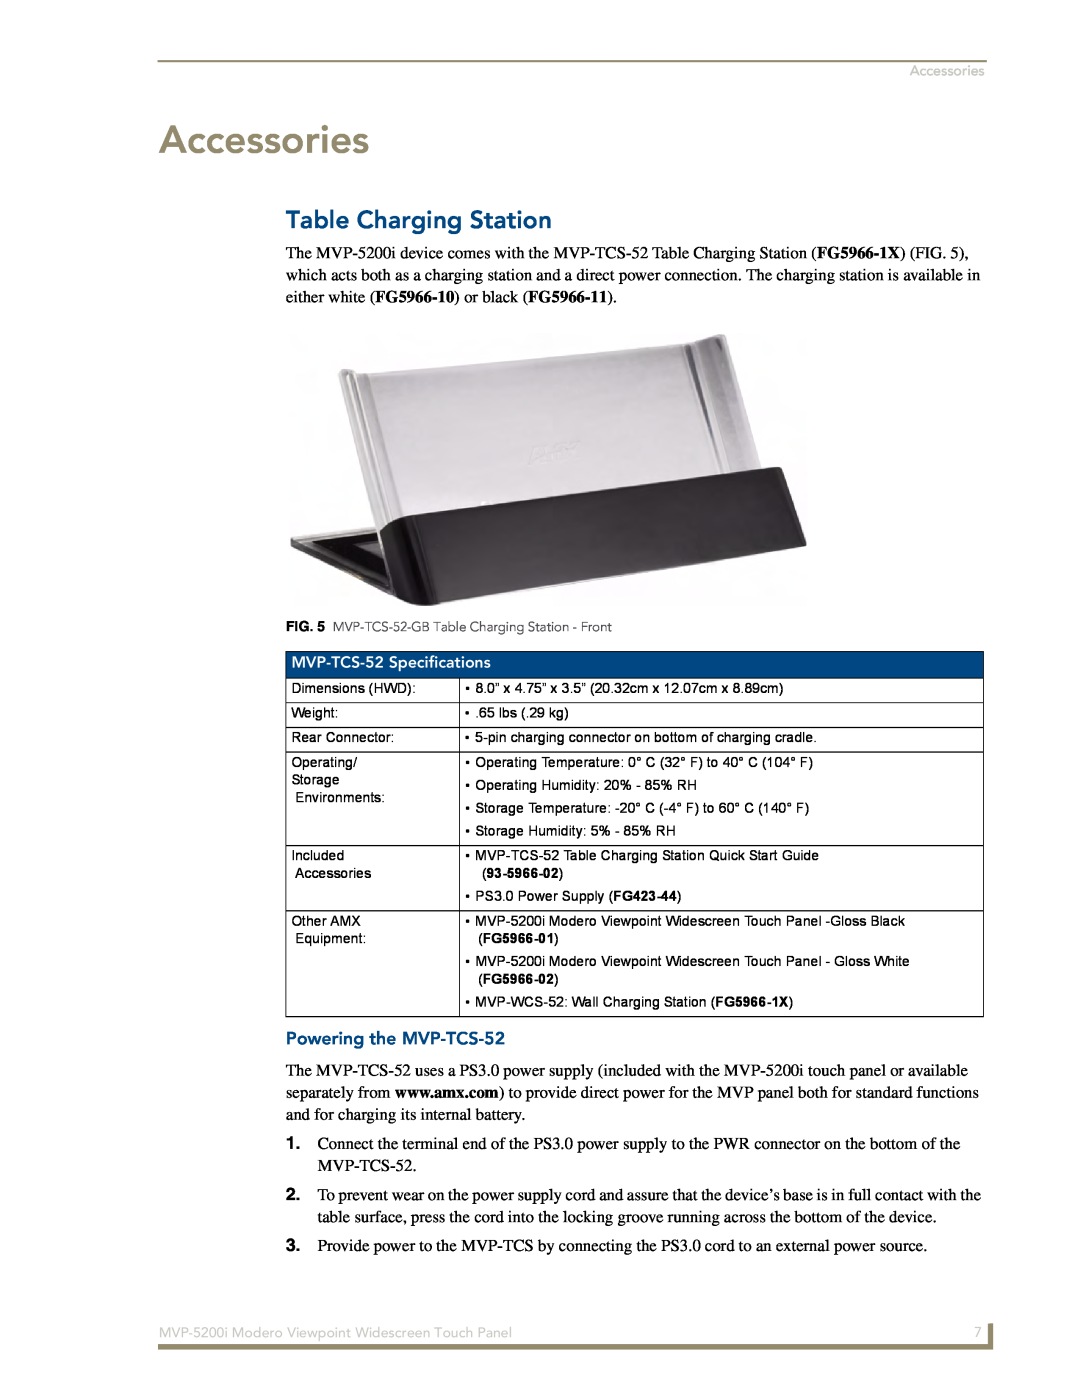 AMX MVP-5200i manual Accessories, Table Charging Station, Powering the MVP-TCS-52 